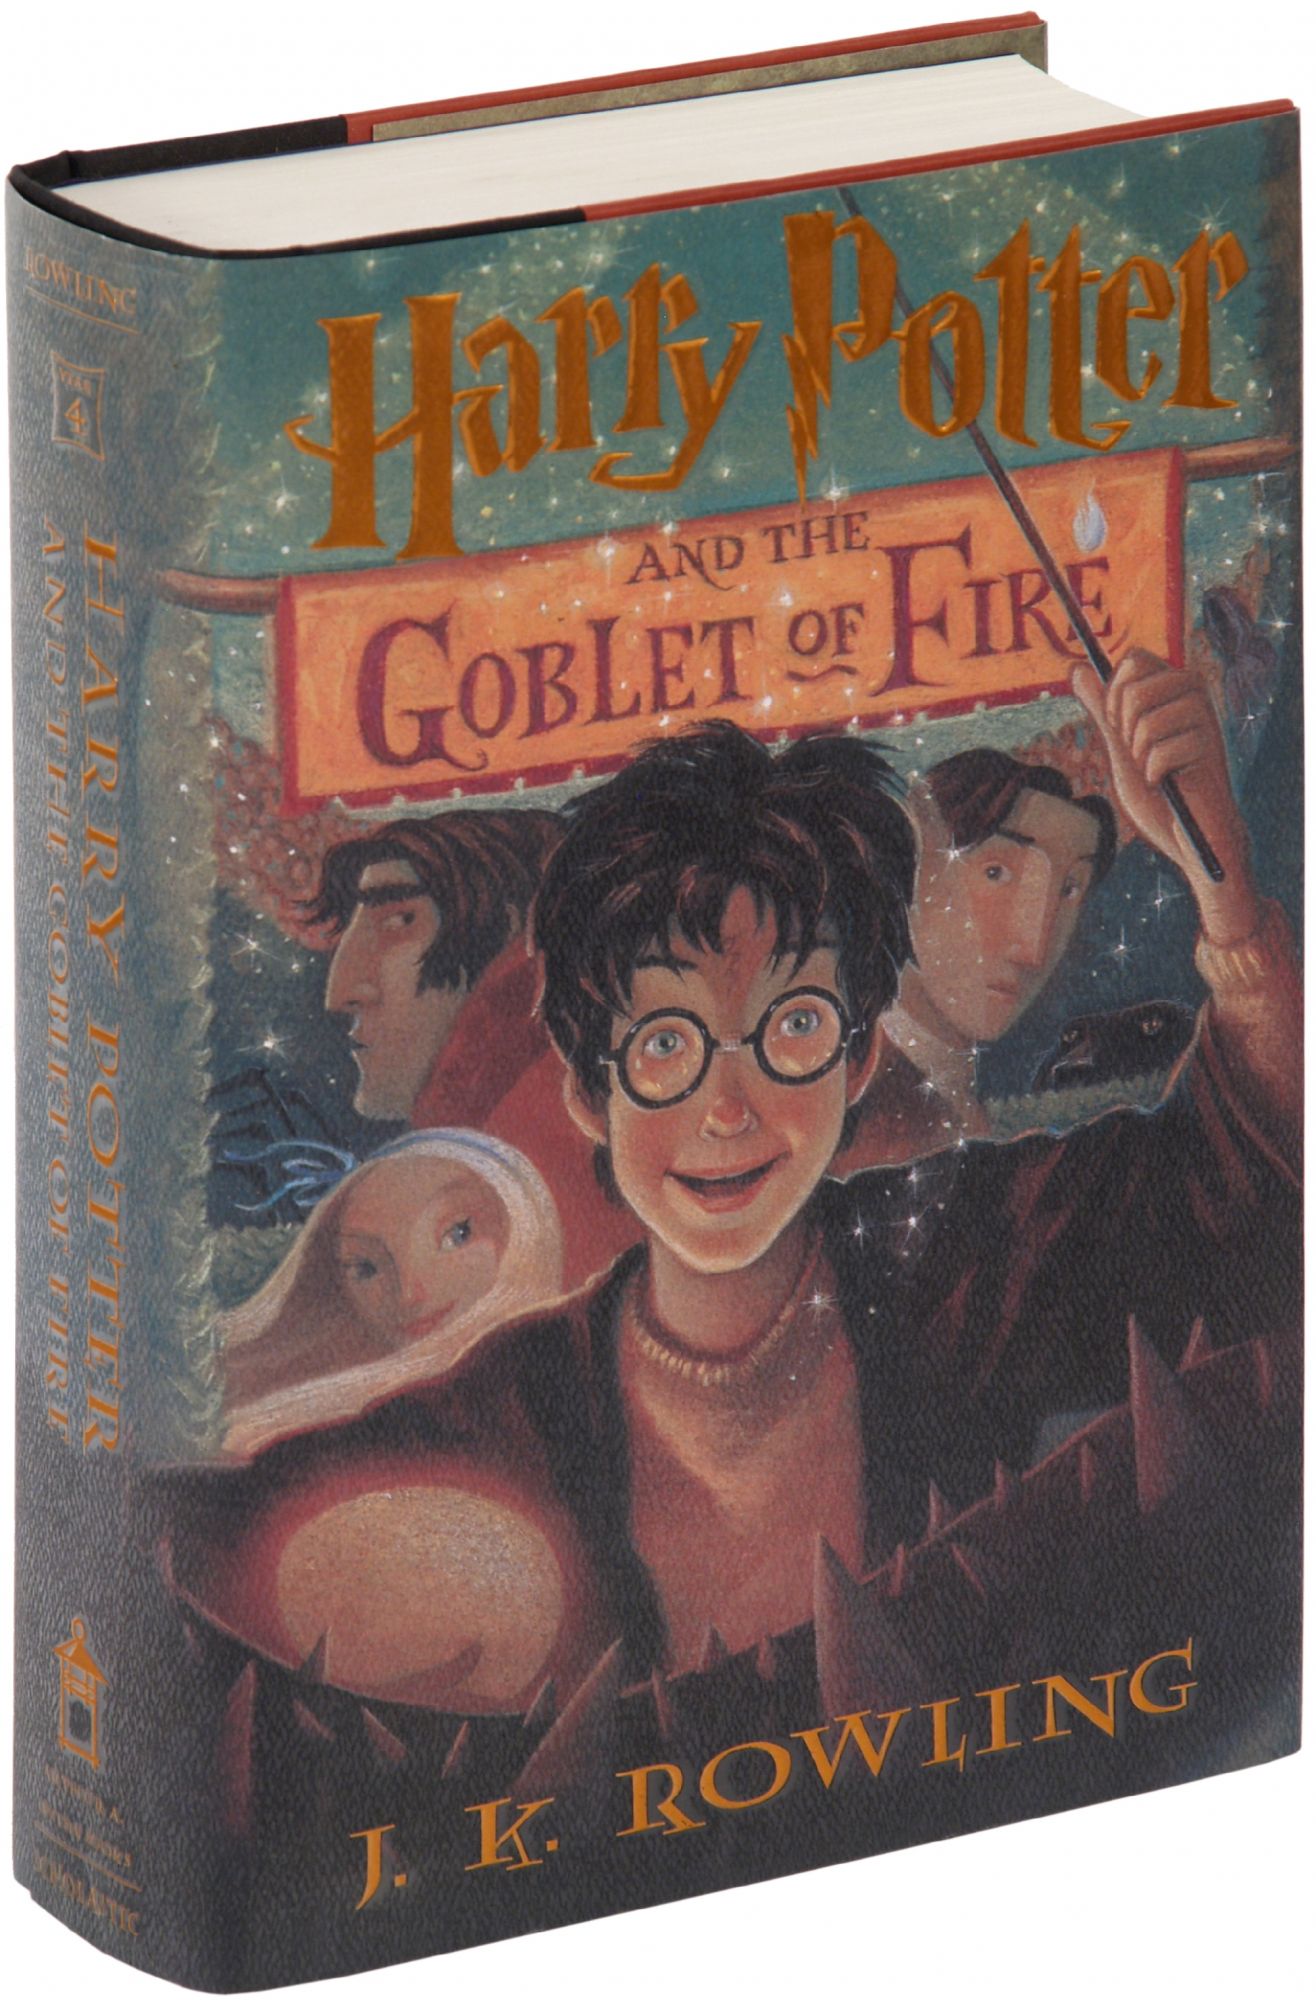 Harry potter and the goblet of fire book hardcover